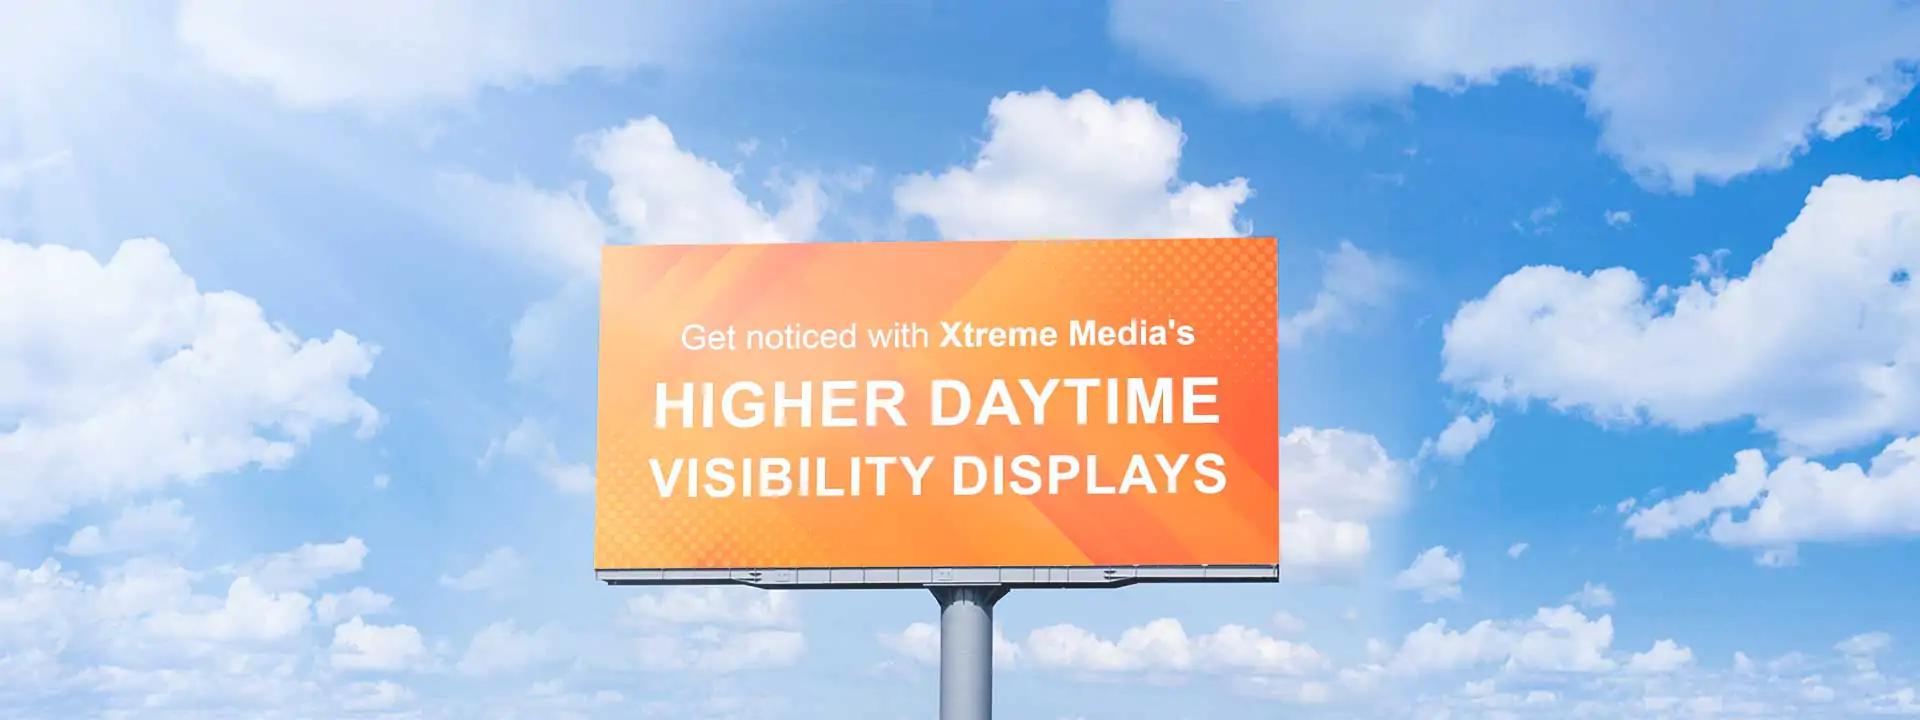 Don’t let the light of the day dim your message. Get noticed with Higher Daytime Visibility Displays